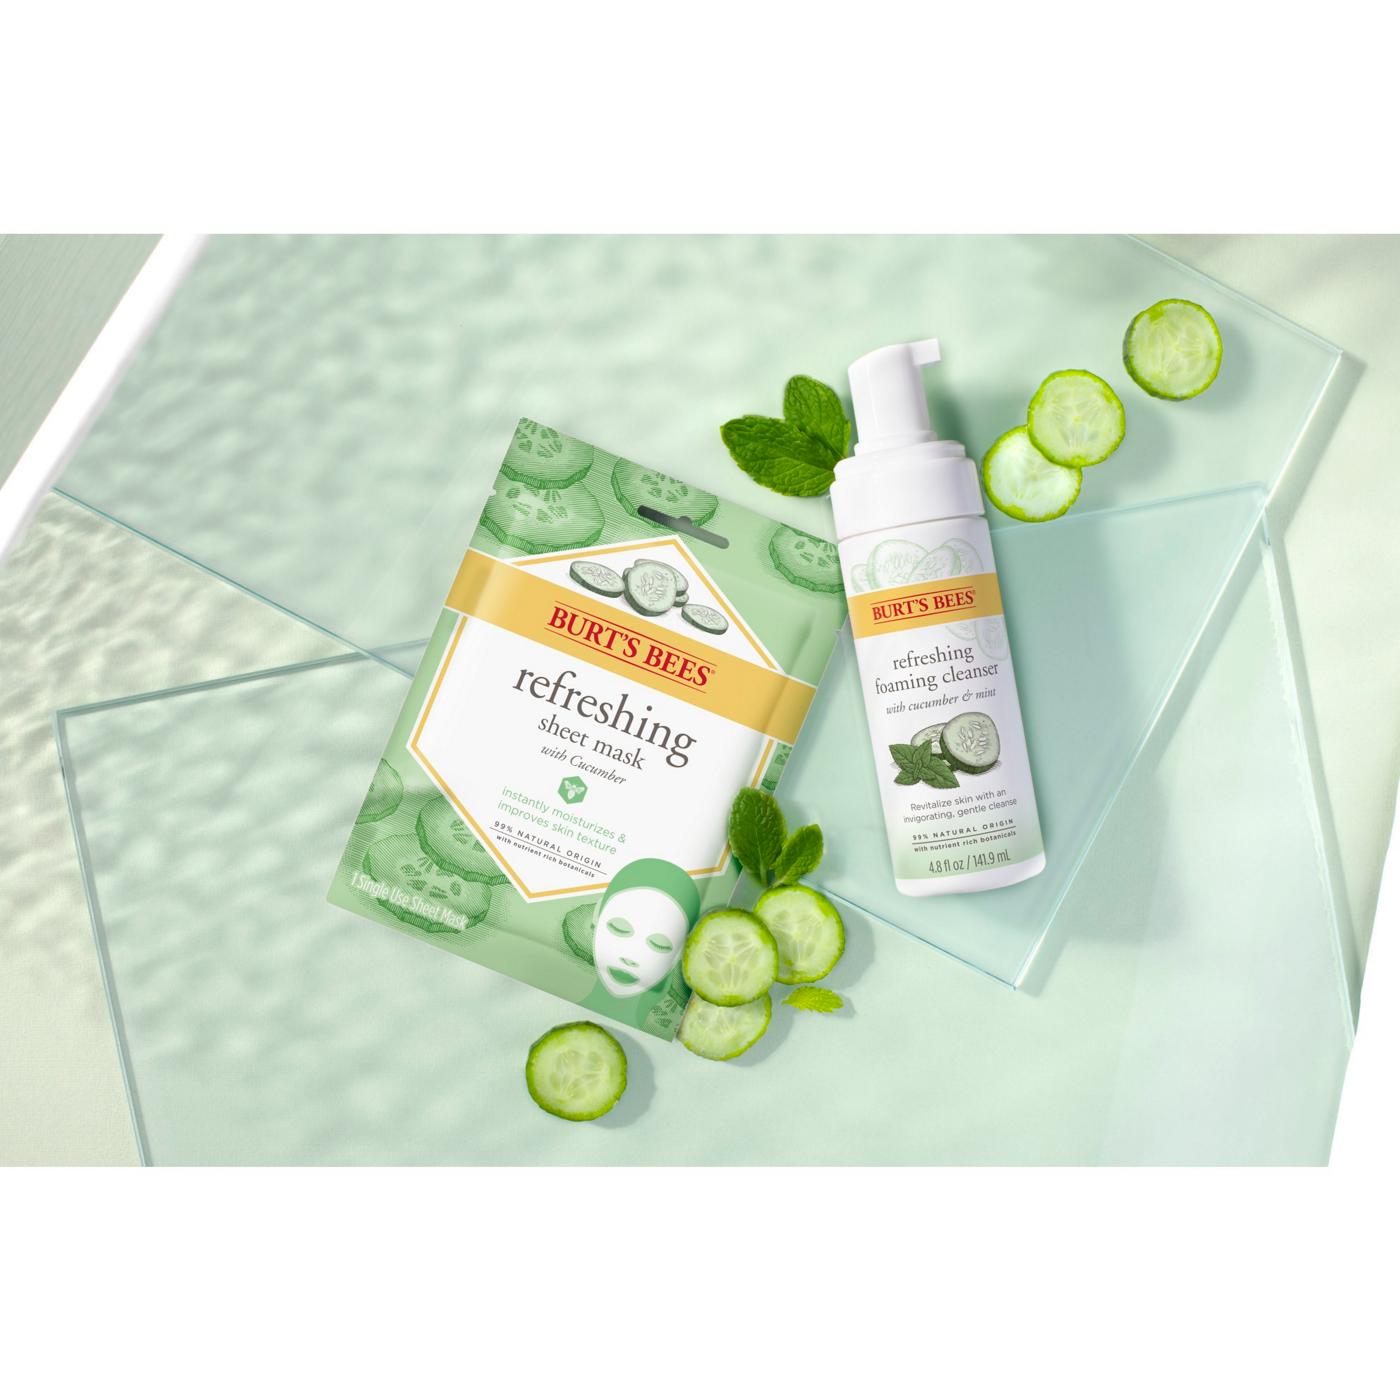 Burt's Bees Cucumber & Mint Refreshing Foaming Face Cleanser; image 2 of 9